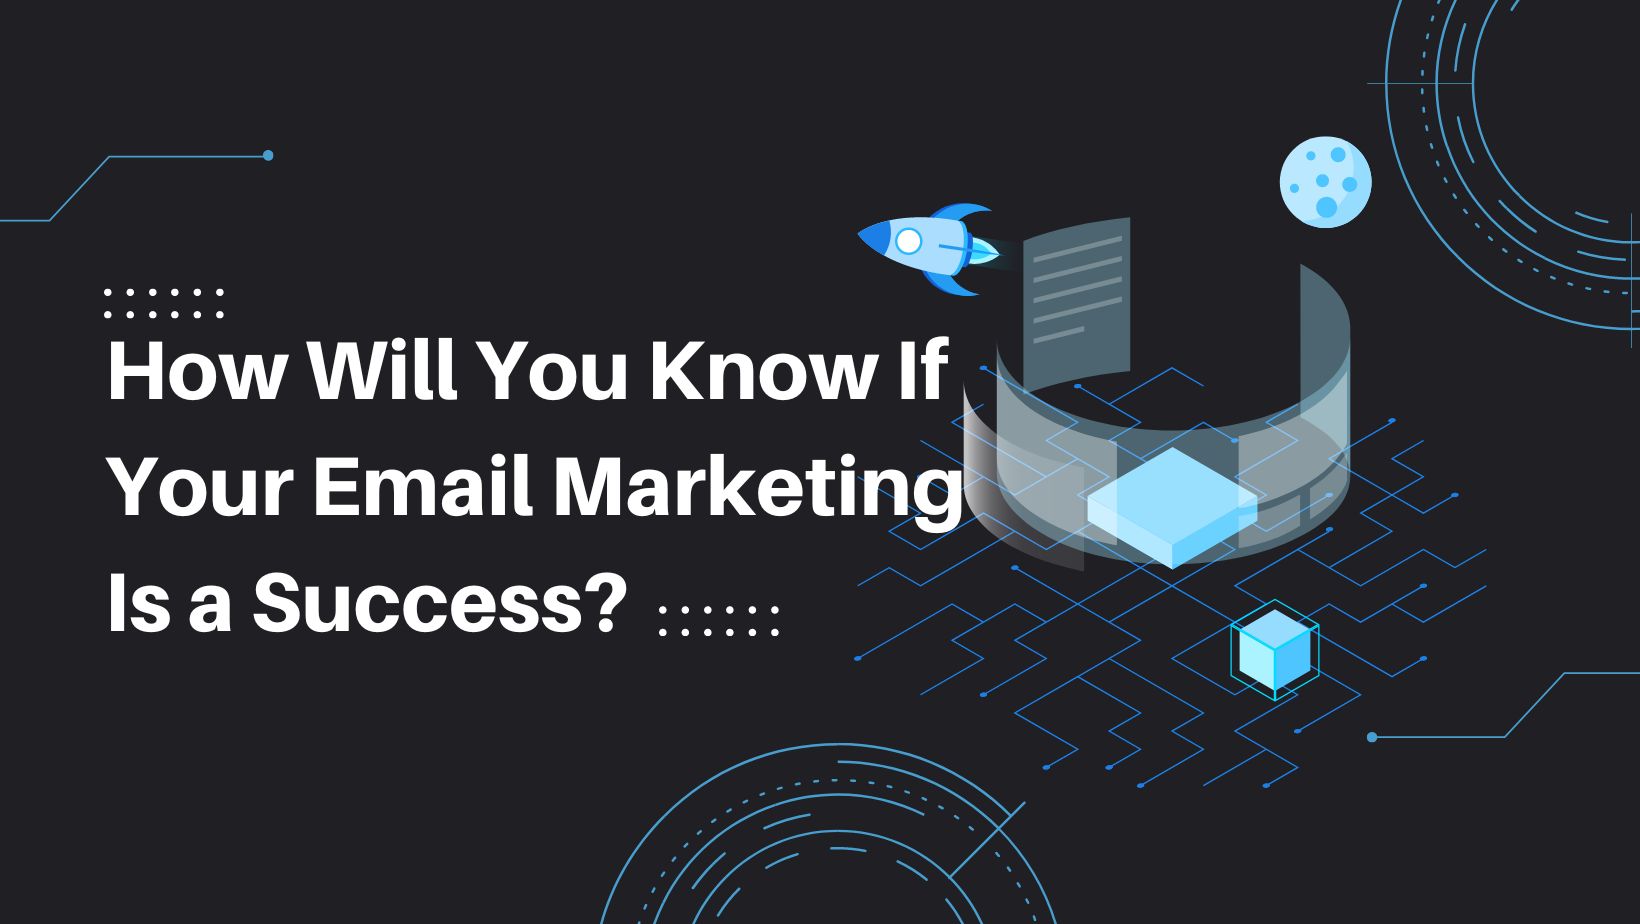 How Will You Know If Your Email Marketing Is a Success?